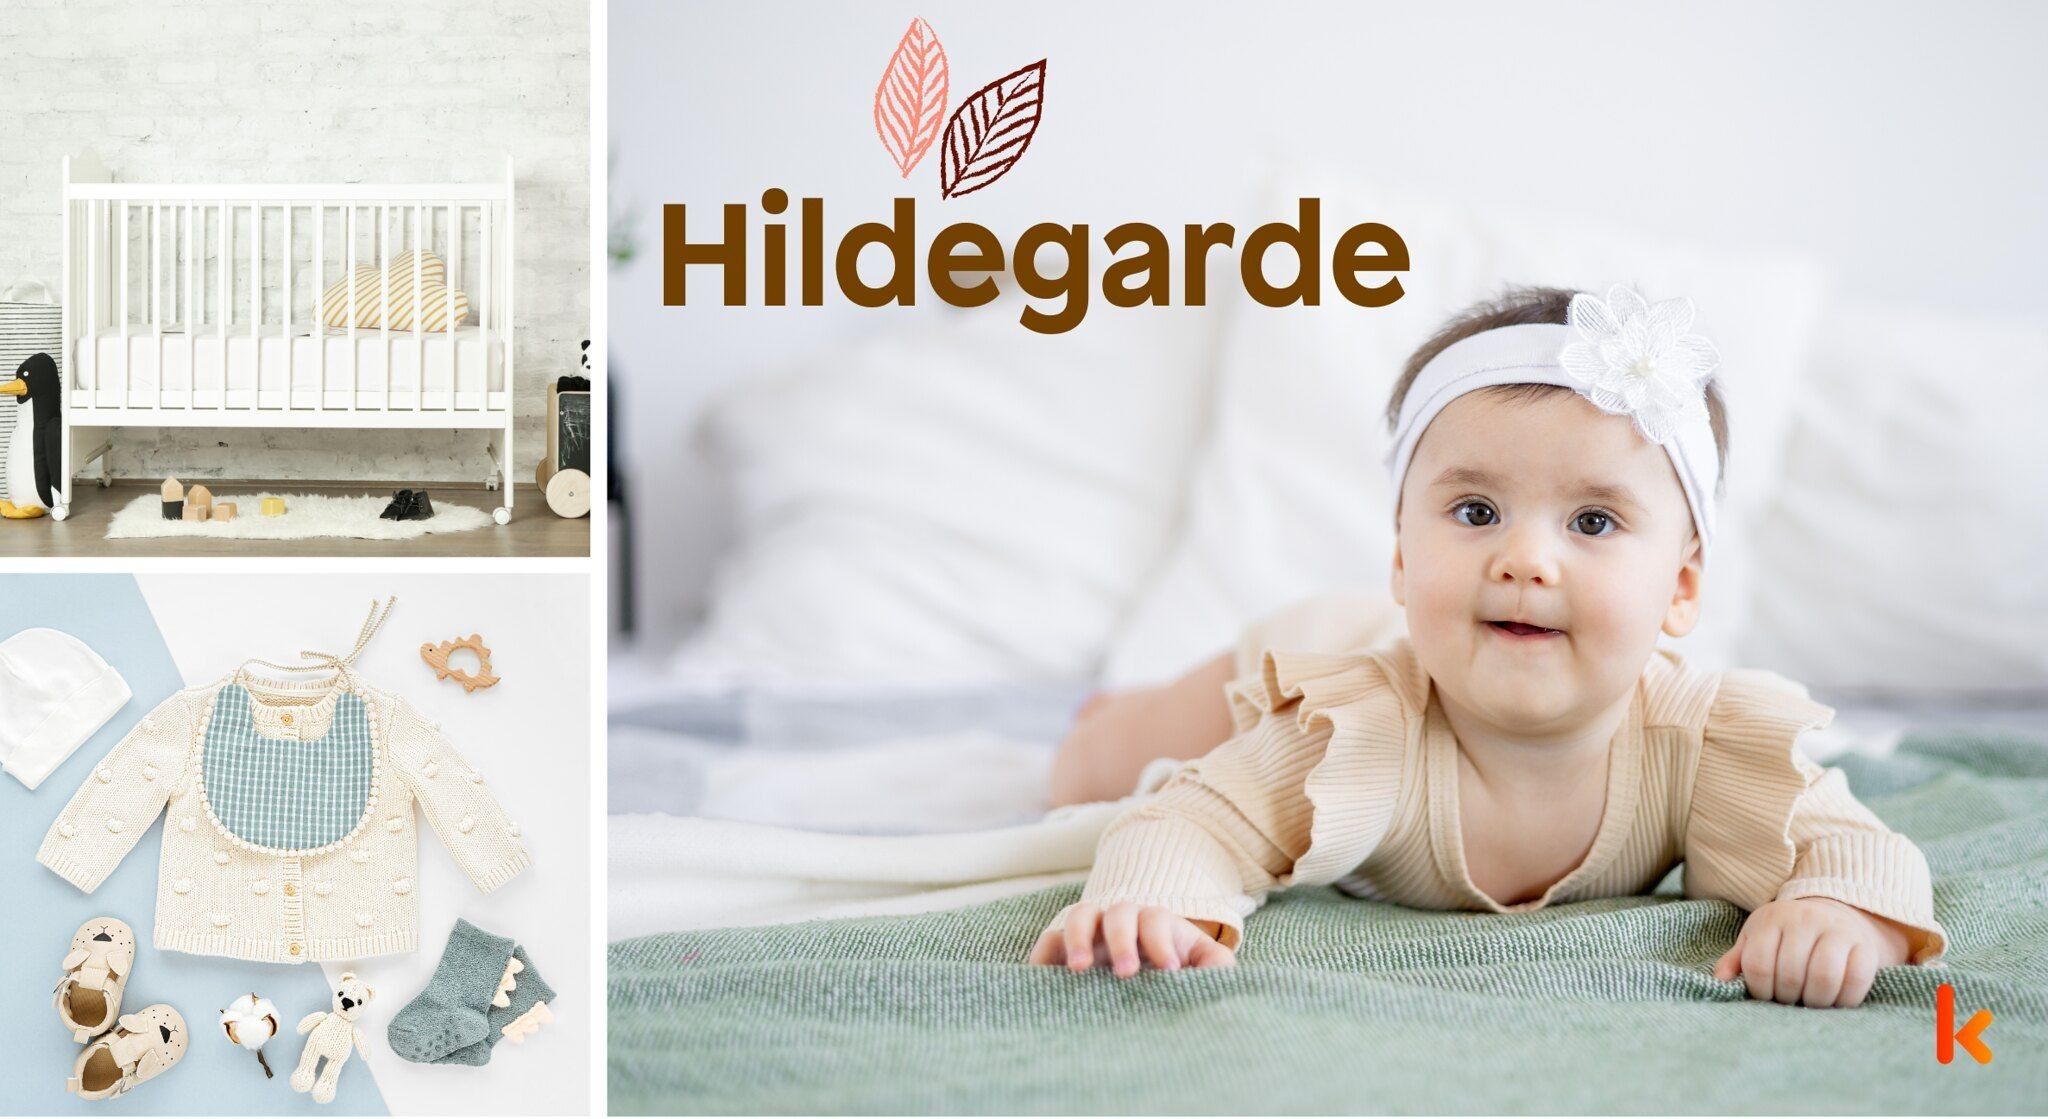 Meaning of the name Hildegarde